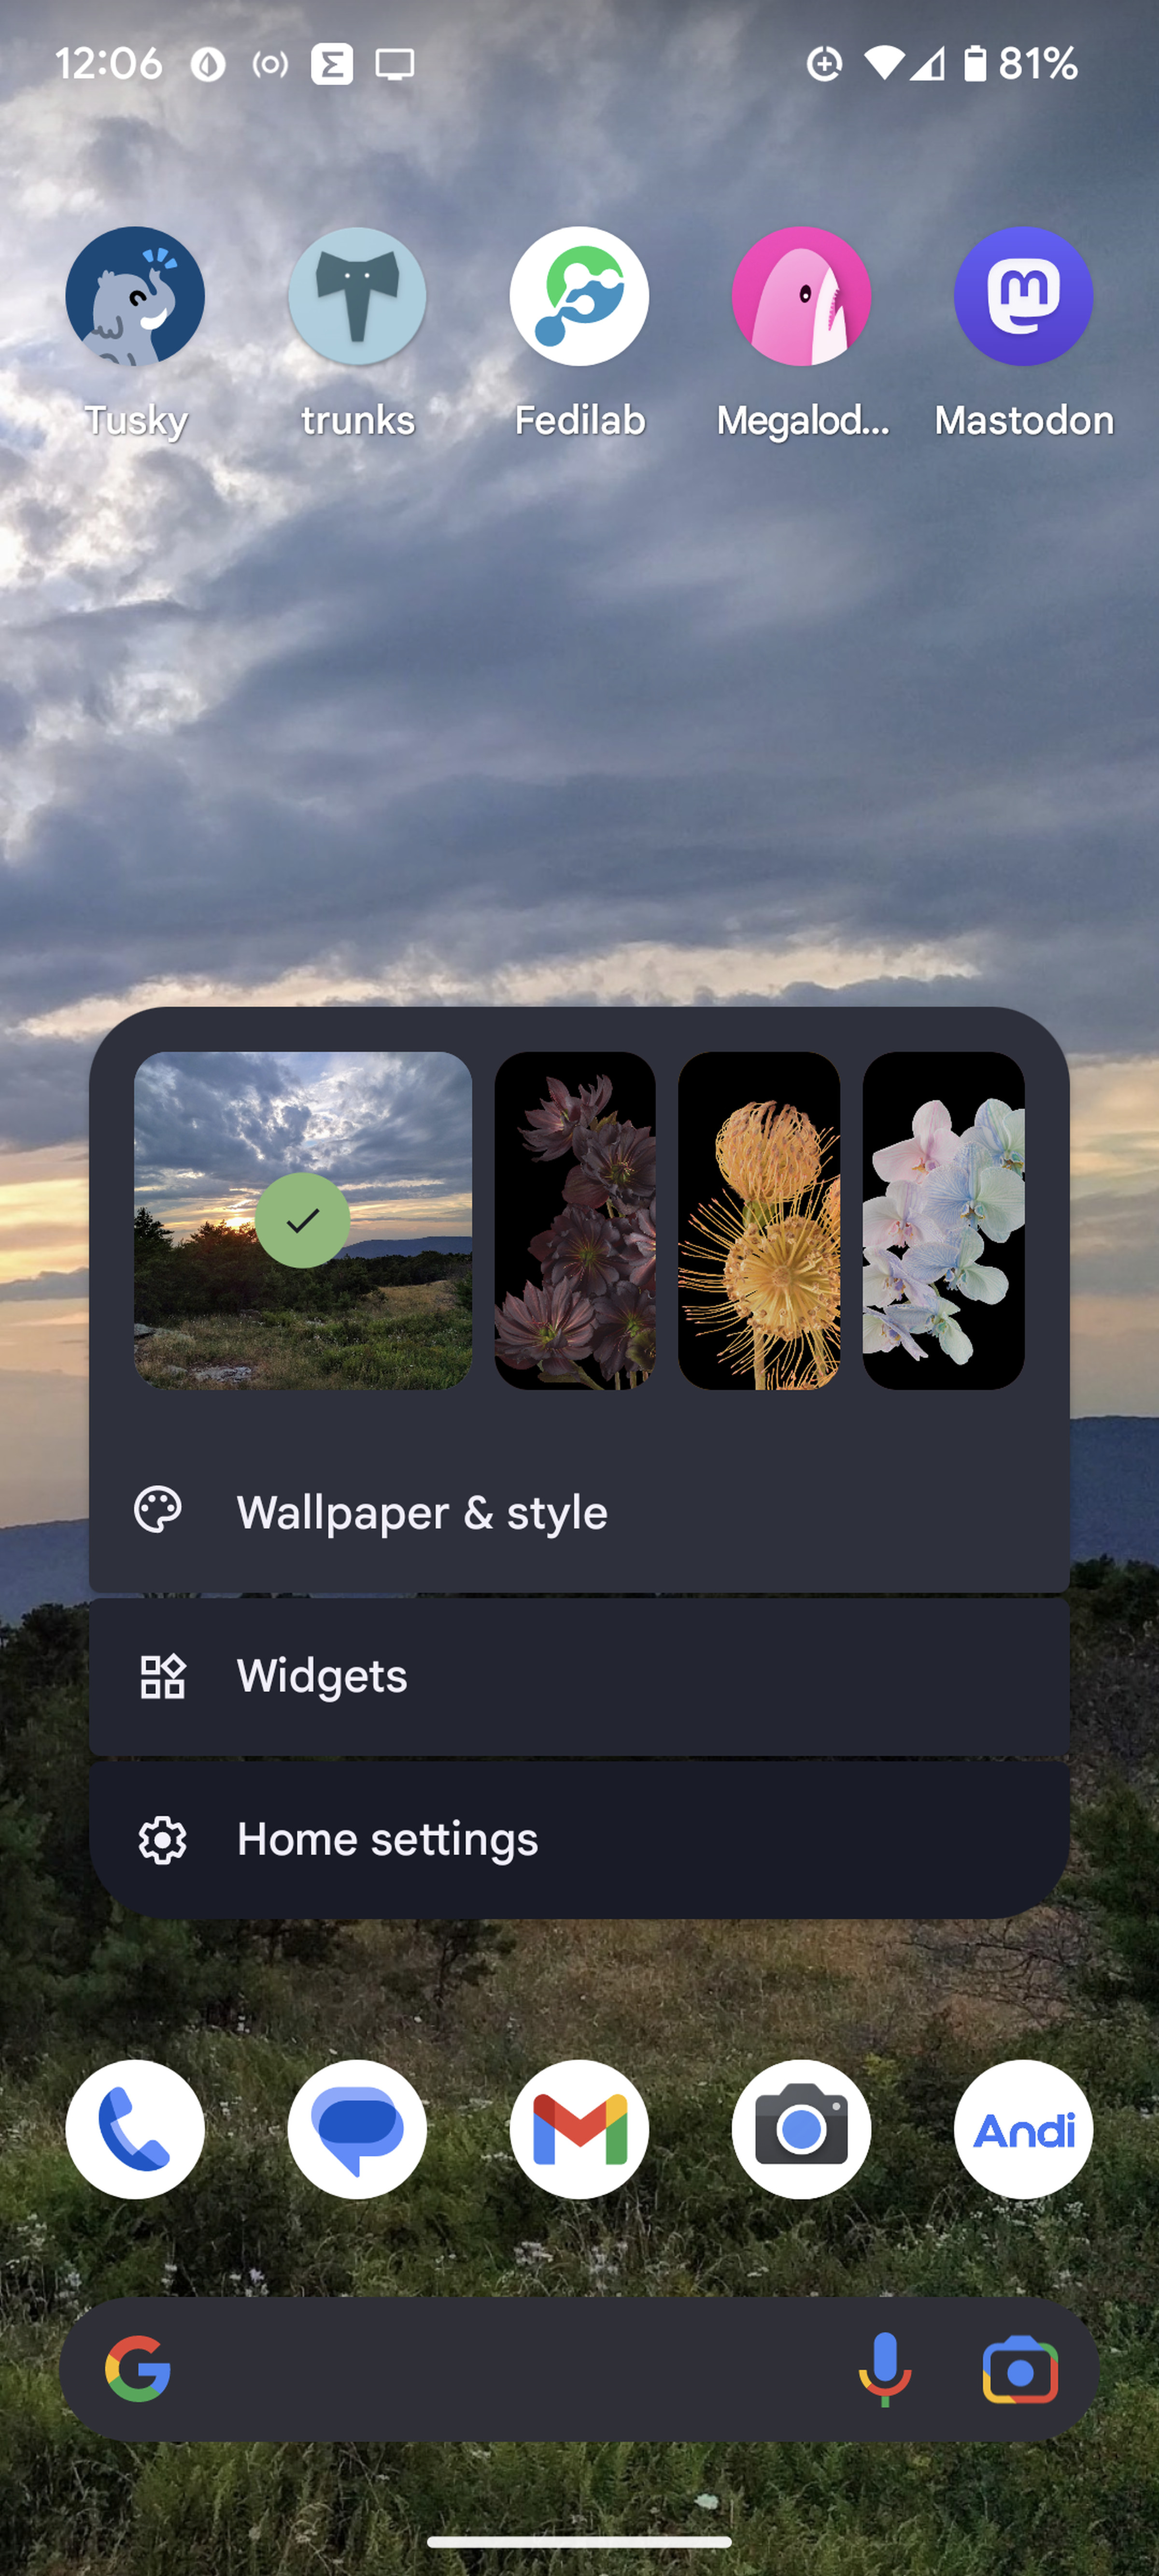 Android home screen with a pop-up menu showing different wallpapers, and three choices: Wallpaper &amp; style, Widgets, and Home settings